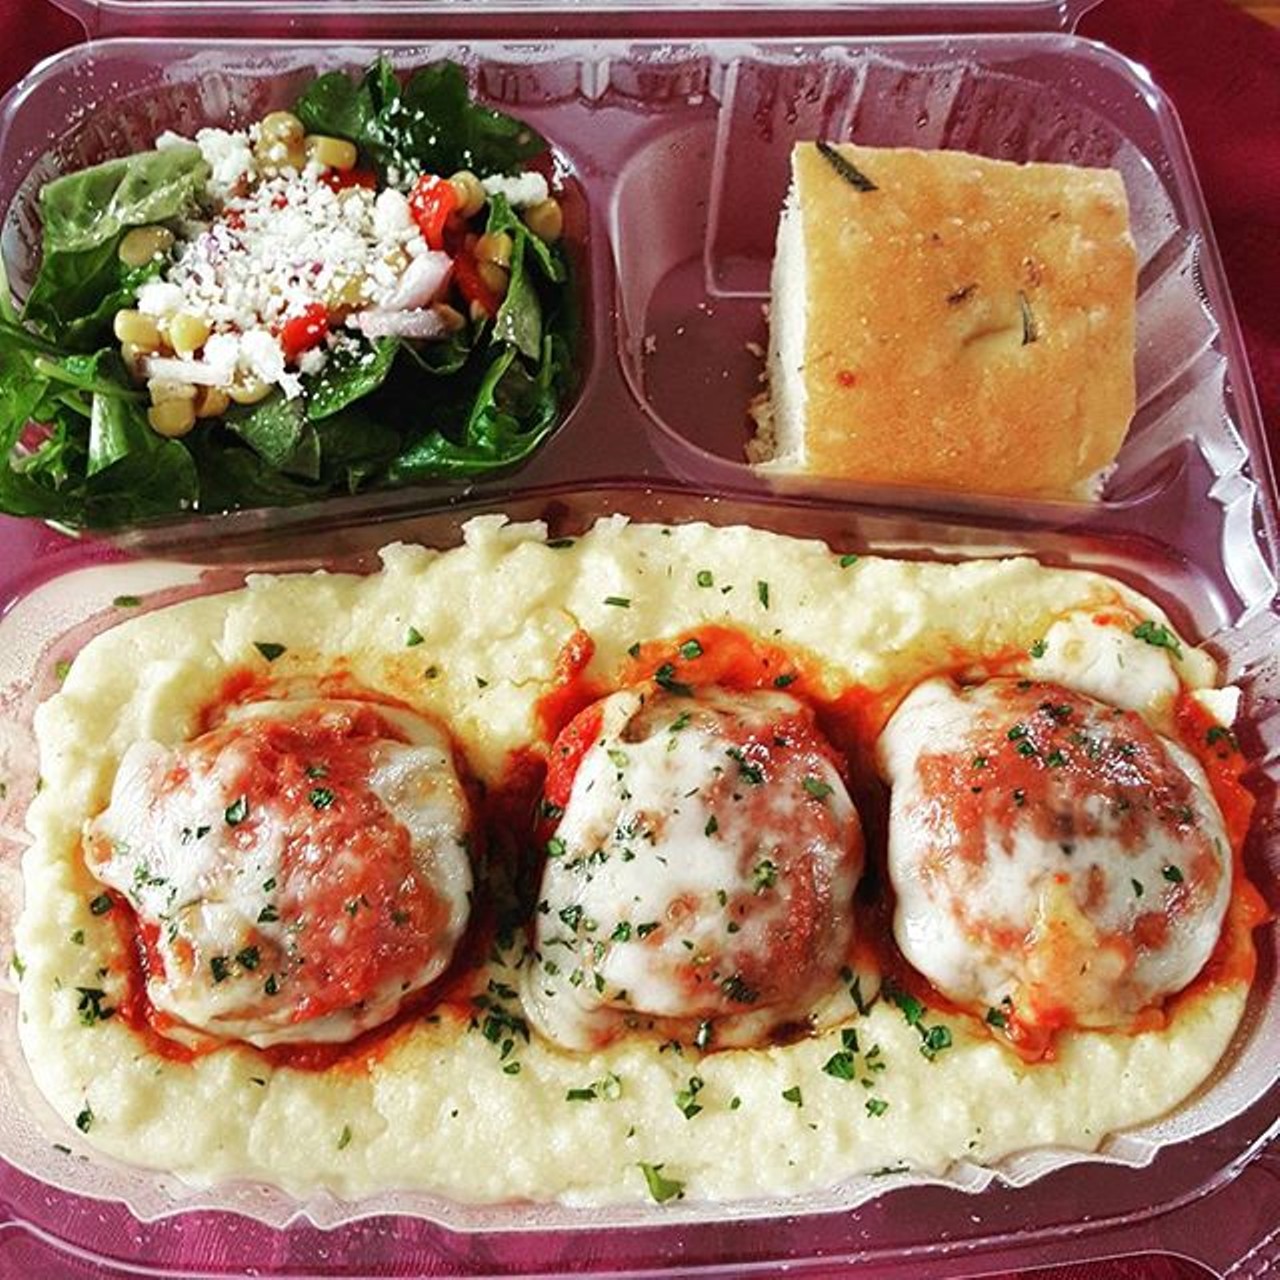 The Meatball Stoppe
7325 Lake Underhill Road, (407) 270-6505
Customers can expect traditional Italian cooking at The Meatball Stoppe. There's a create their own meatball option or people can pick from the family favorites menu.
Photo via scoobe14/Instagram